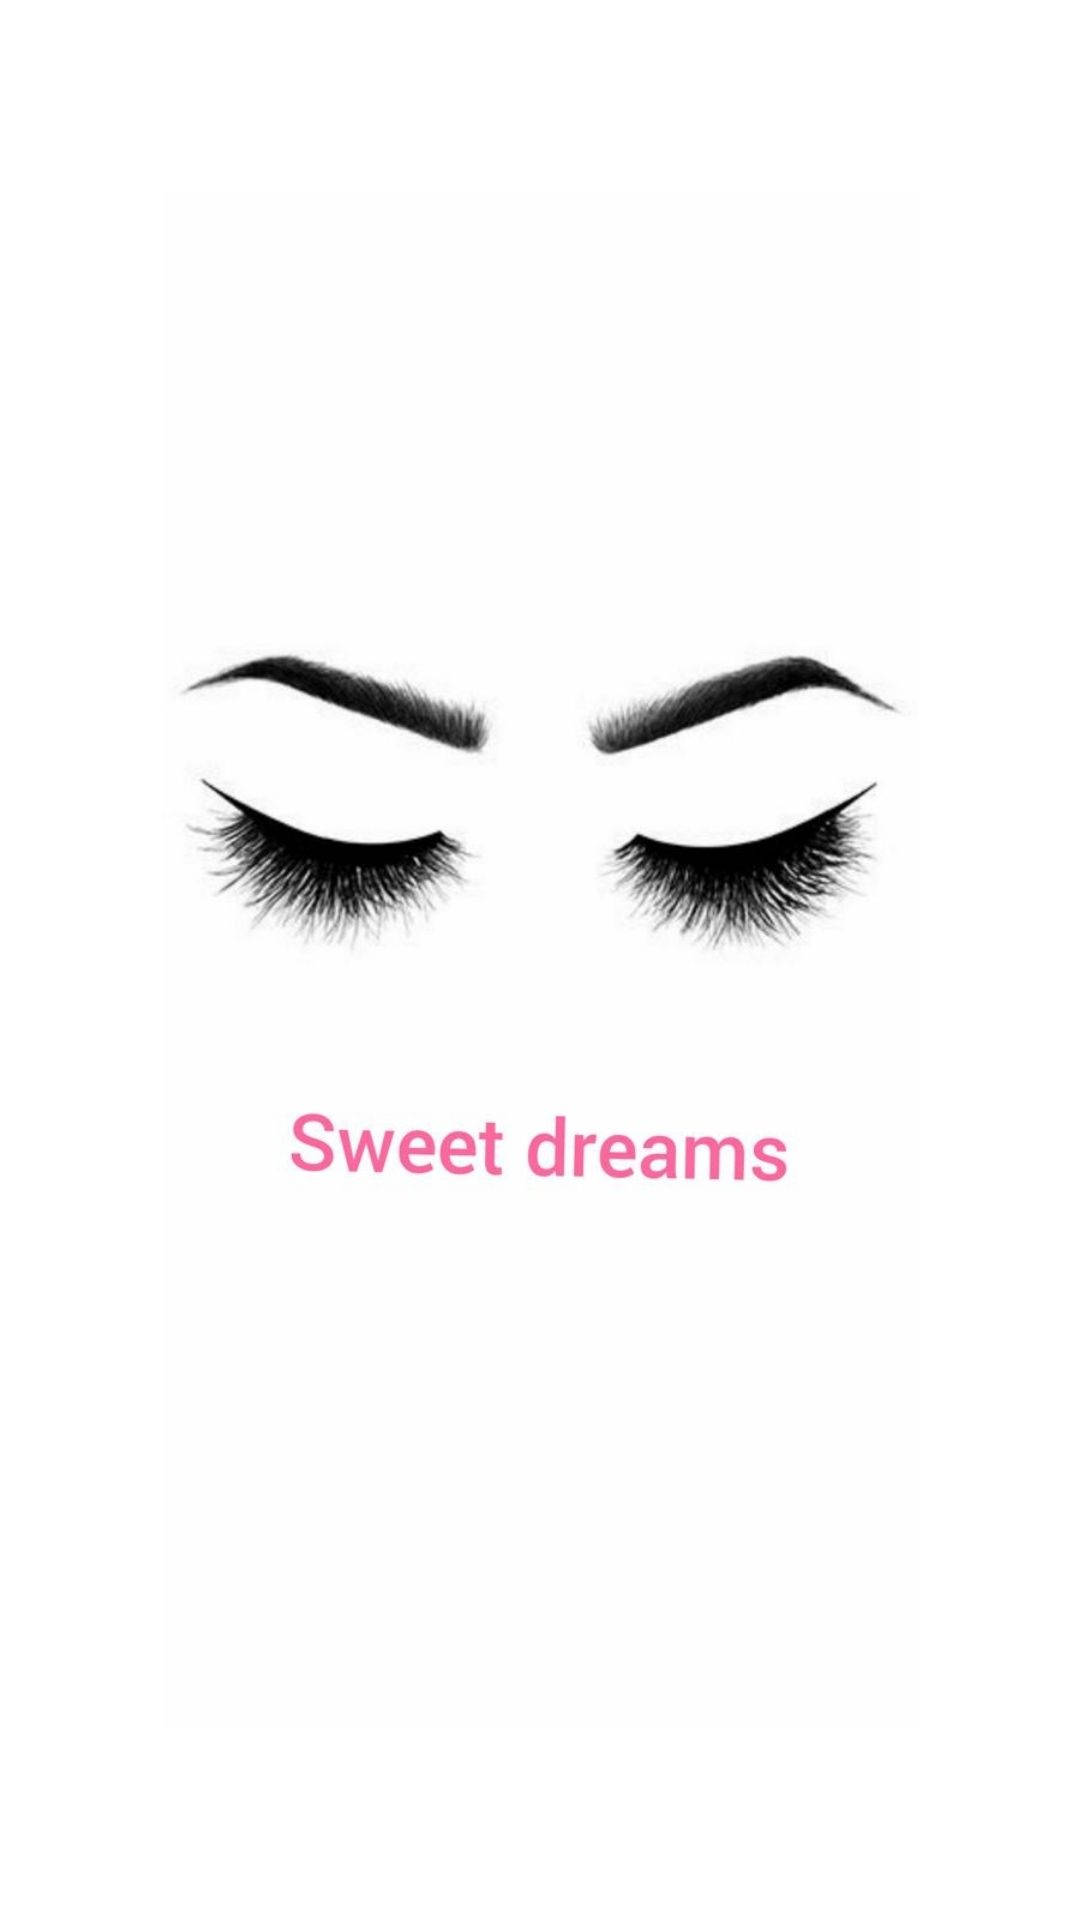 Closed Eyes For Sweet Dreams